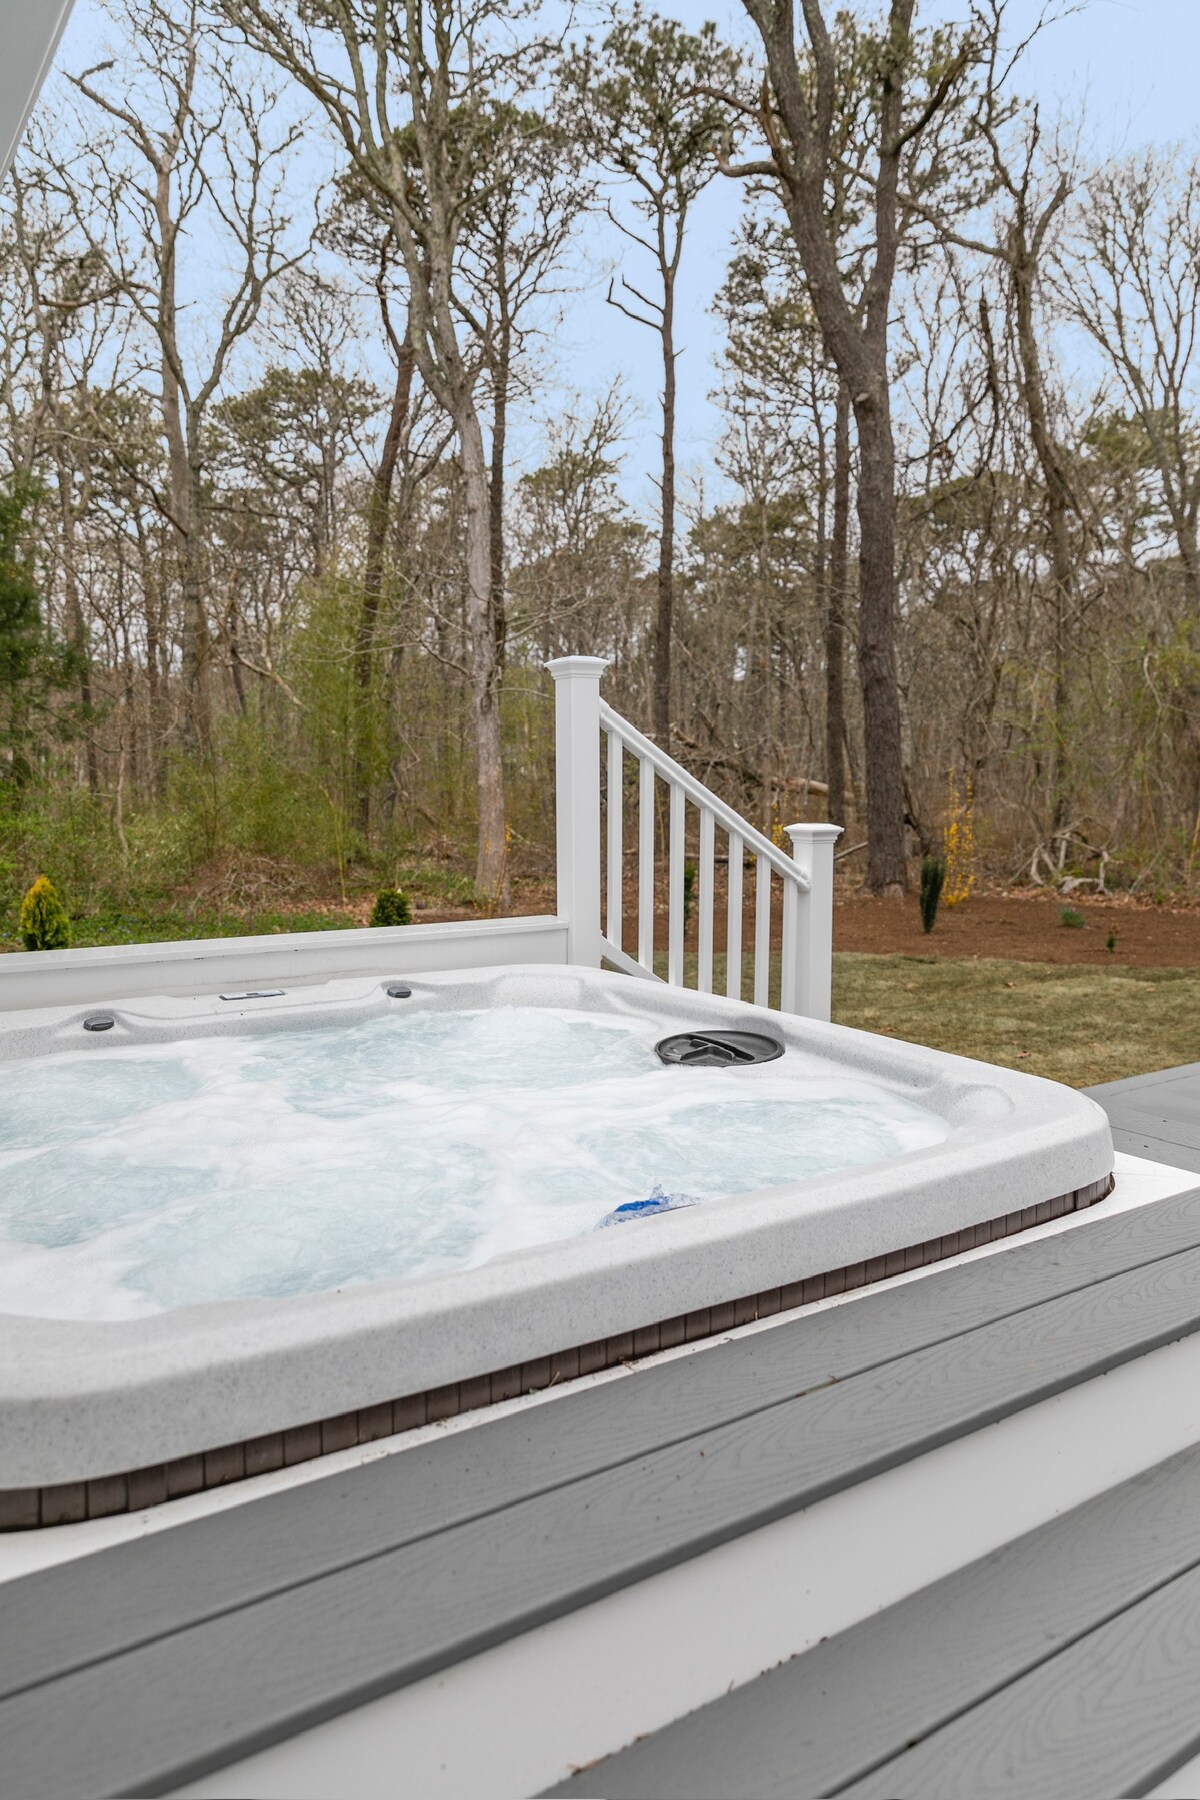 Beach & Recharge! Hot Tub, Fire Pit & EV Charger